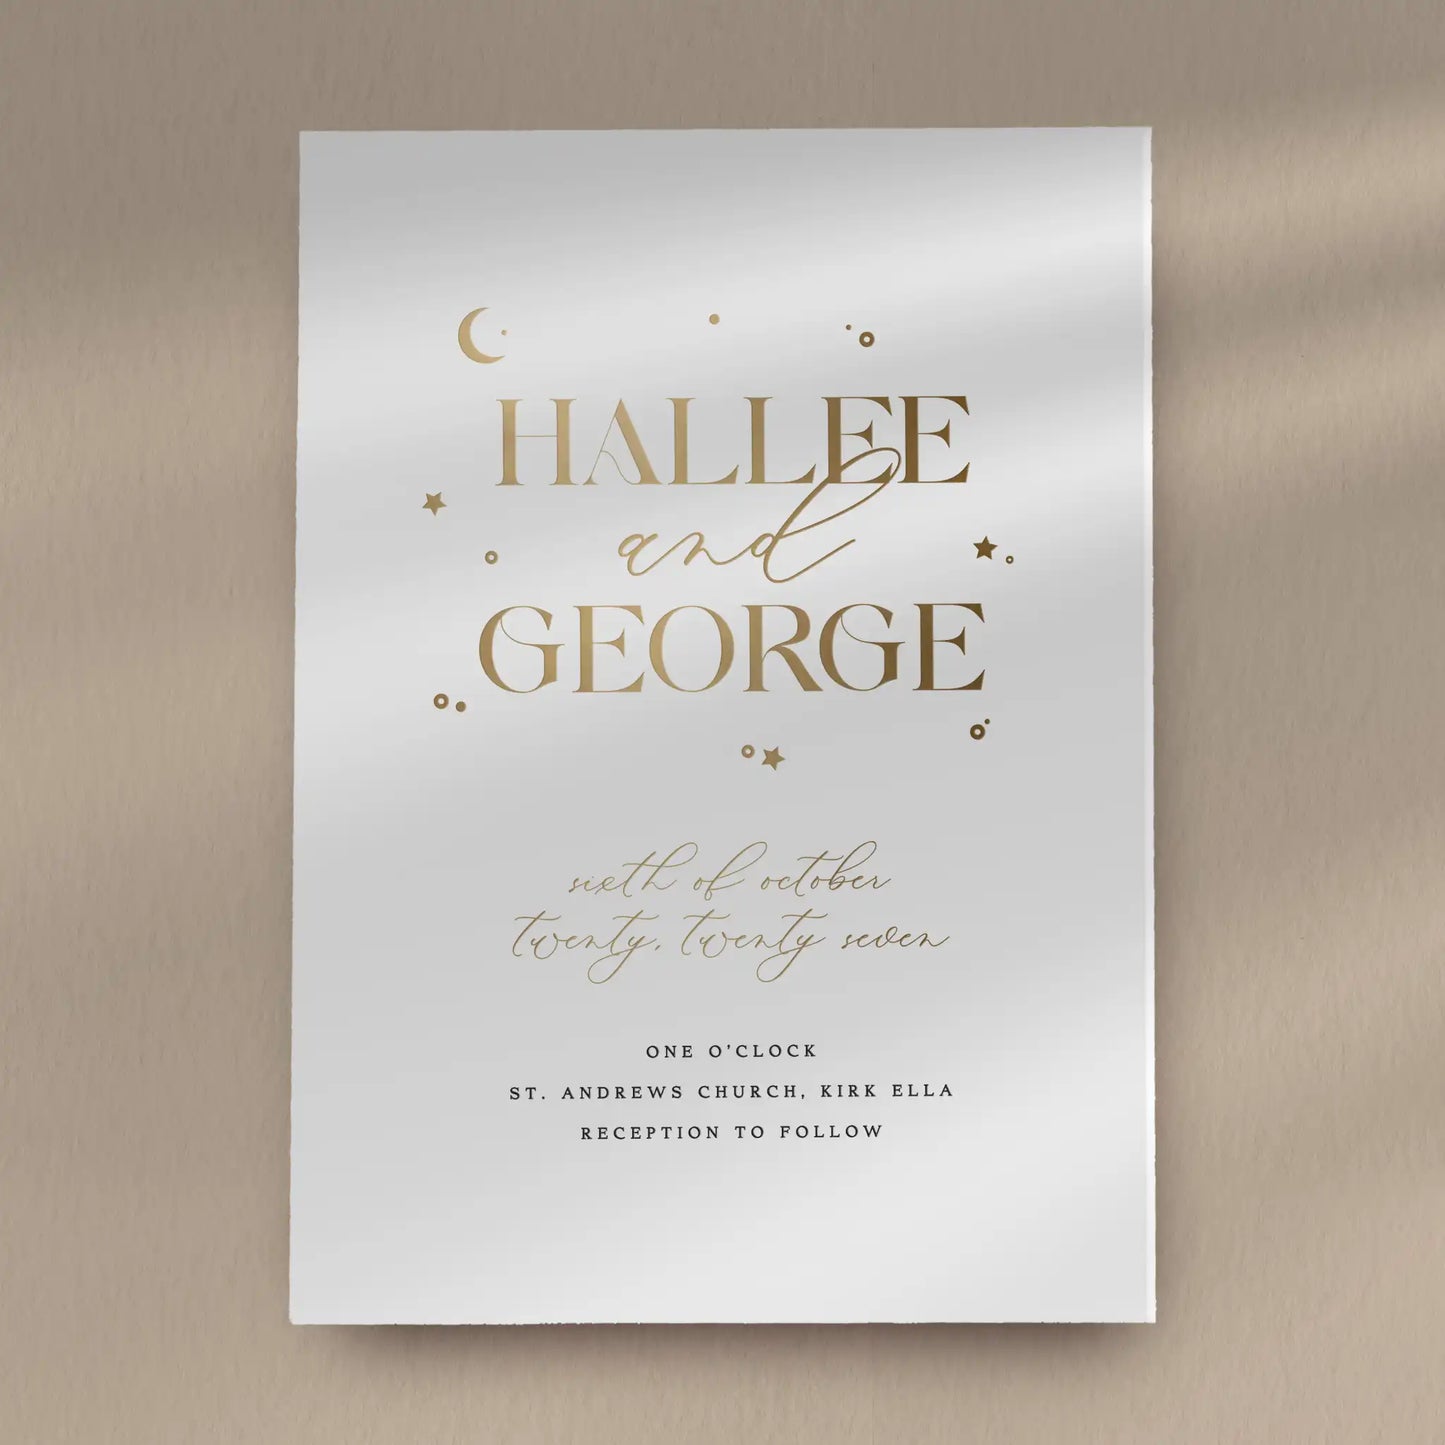 Day Invitation Sample  Ivy and Gold Wedding Stationery Hallee  